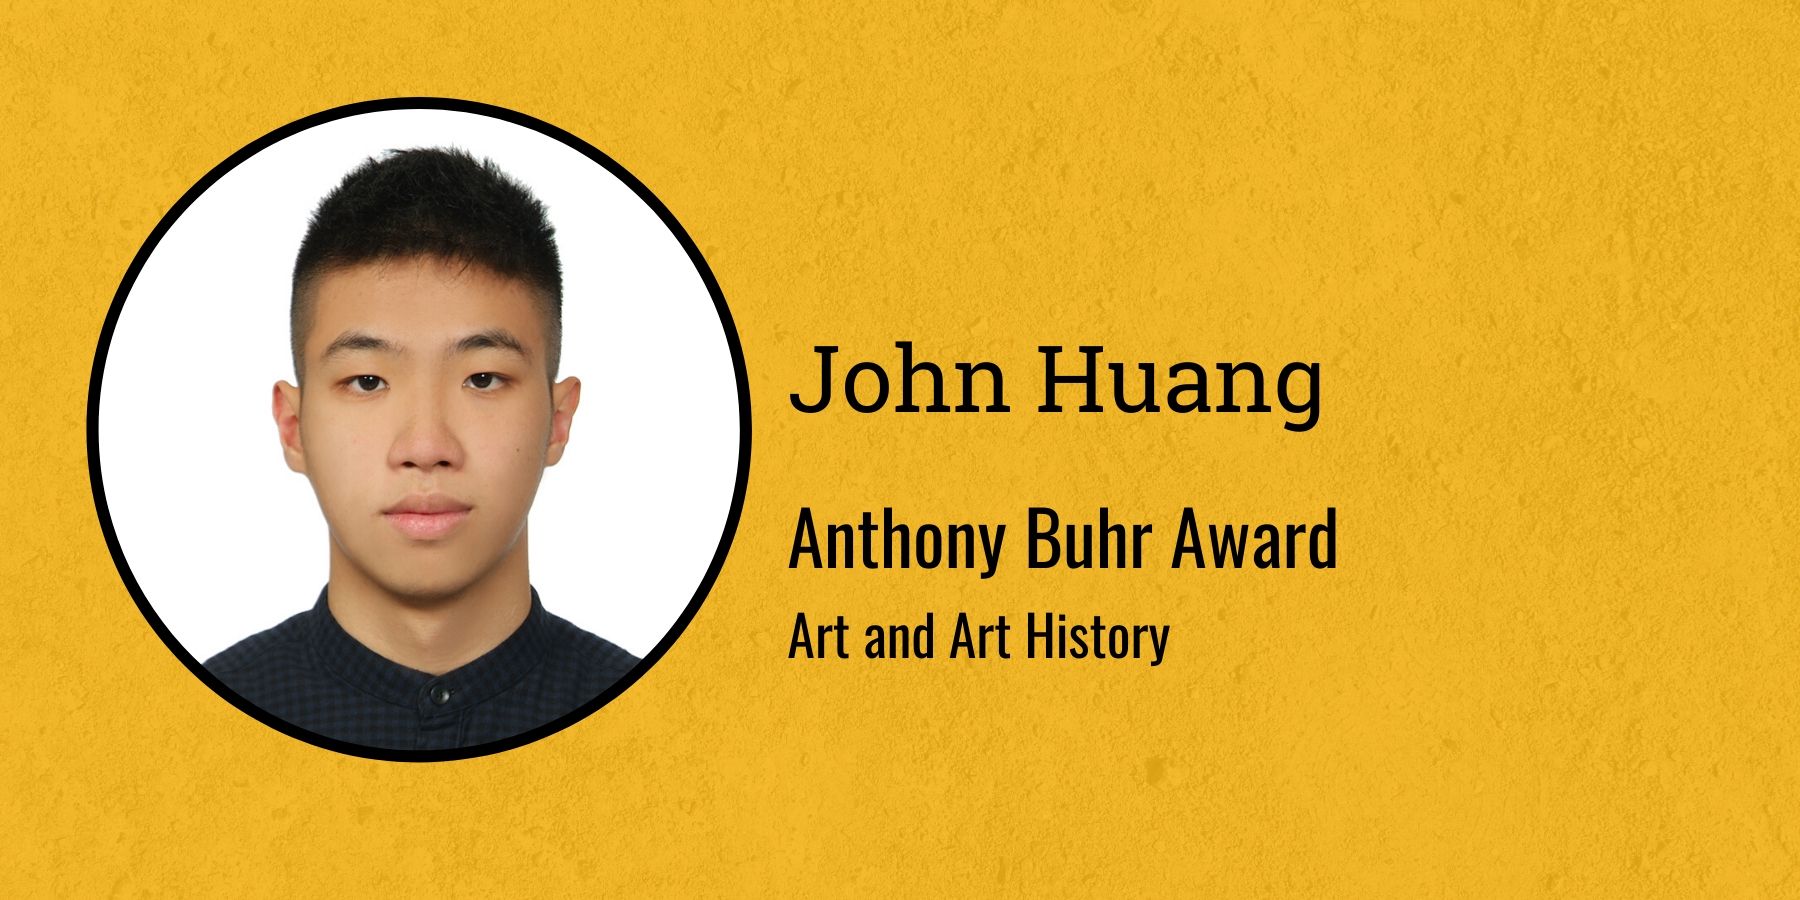 Photo of John Huang and text Anthony Buhr Award, Art and Art History